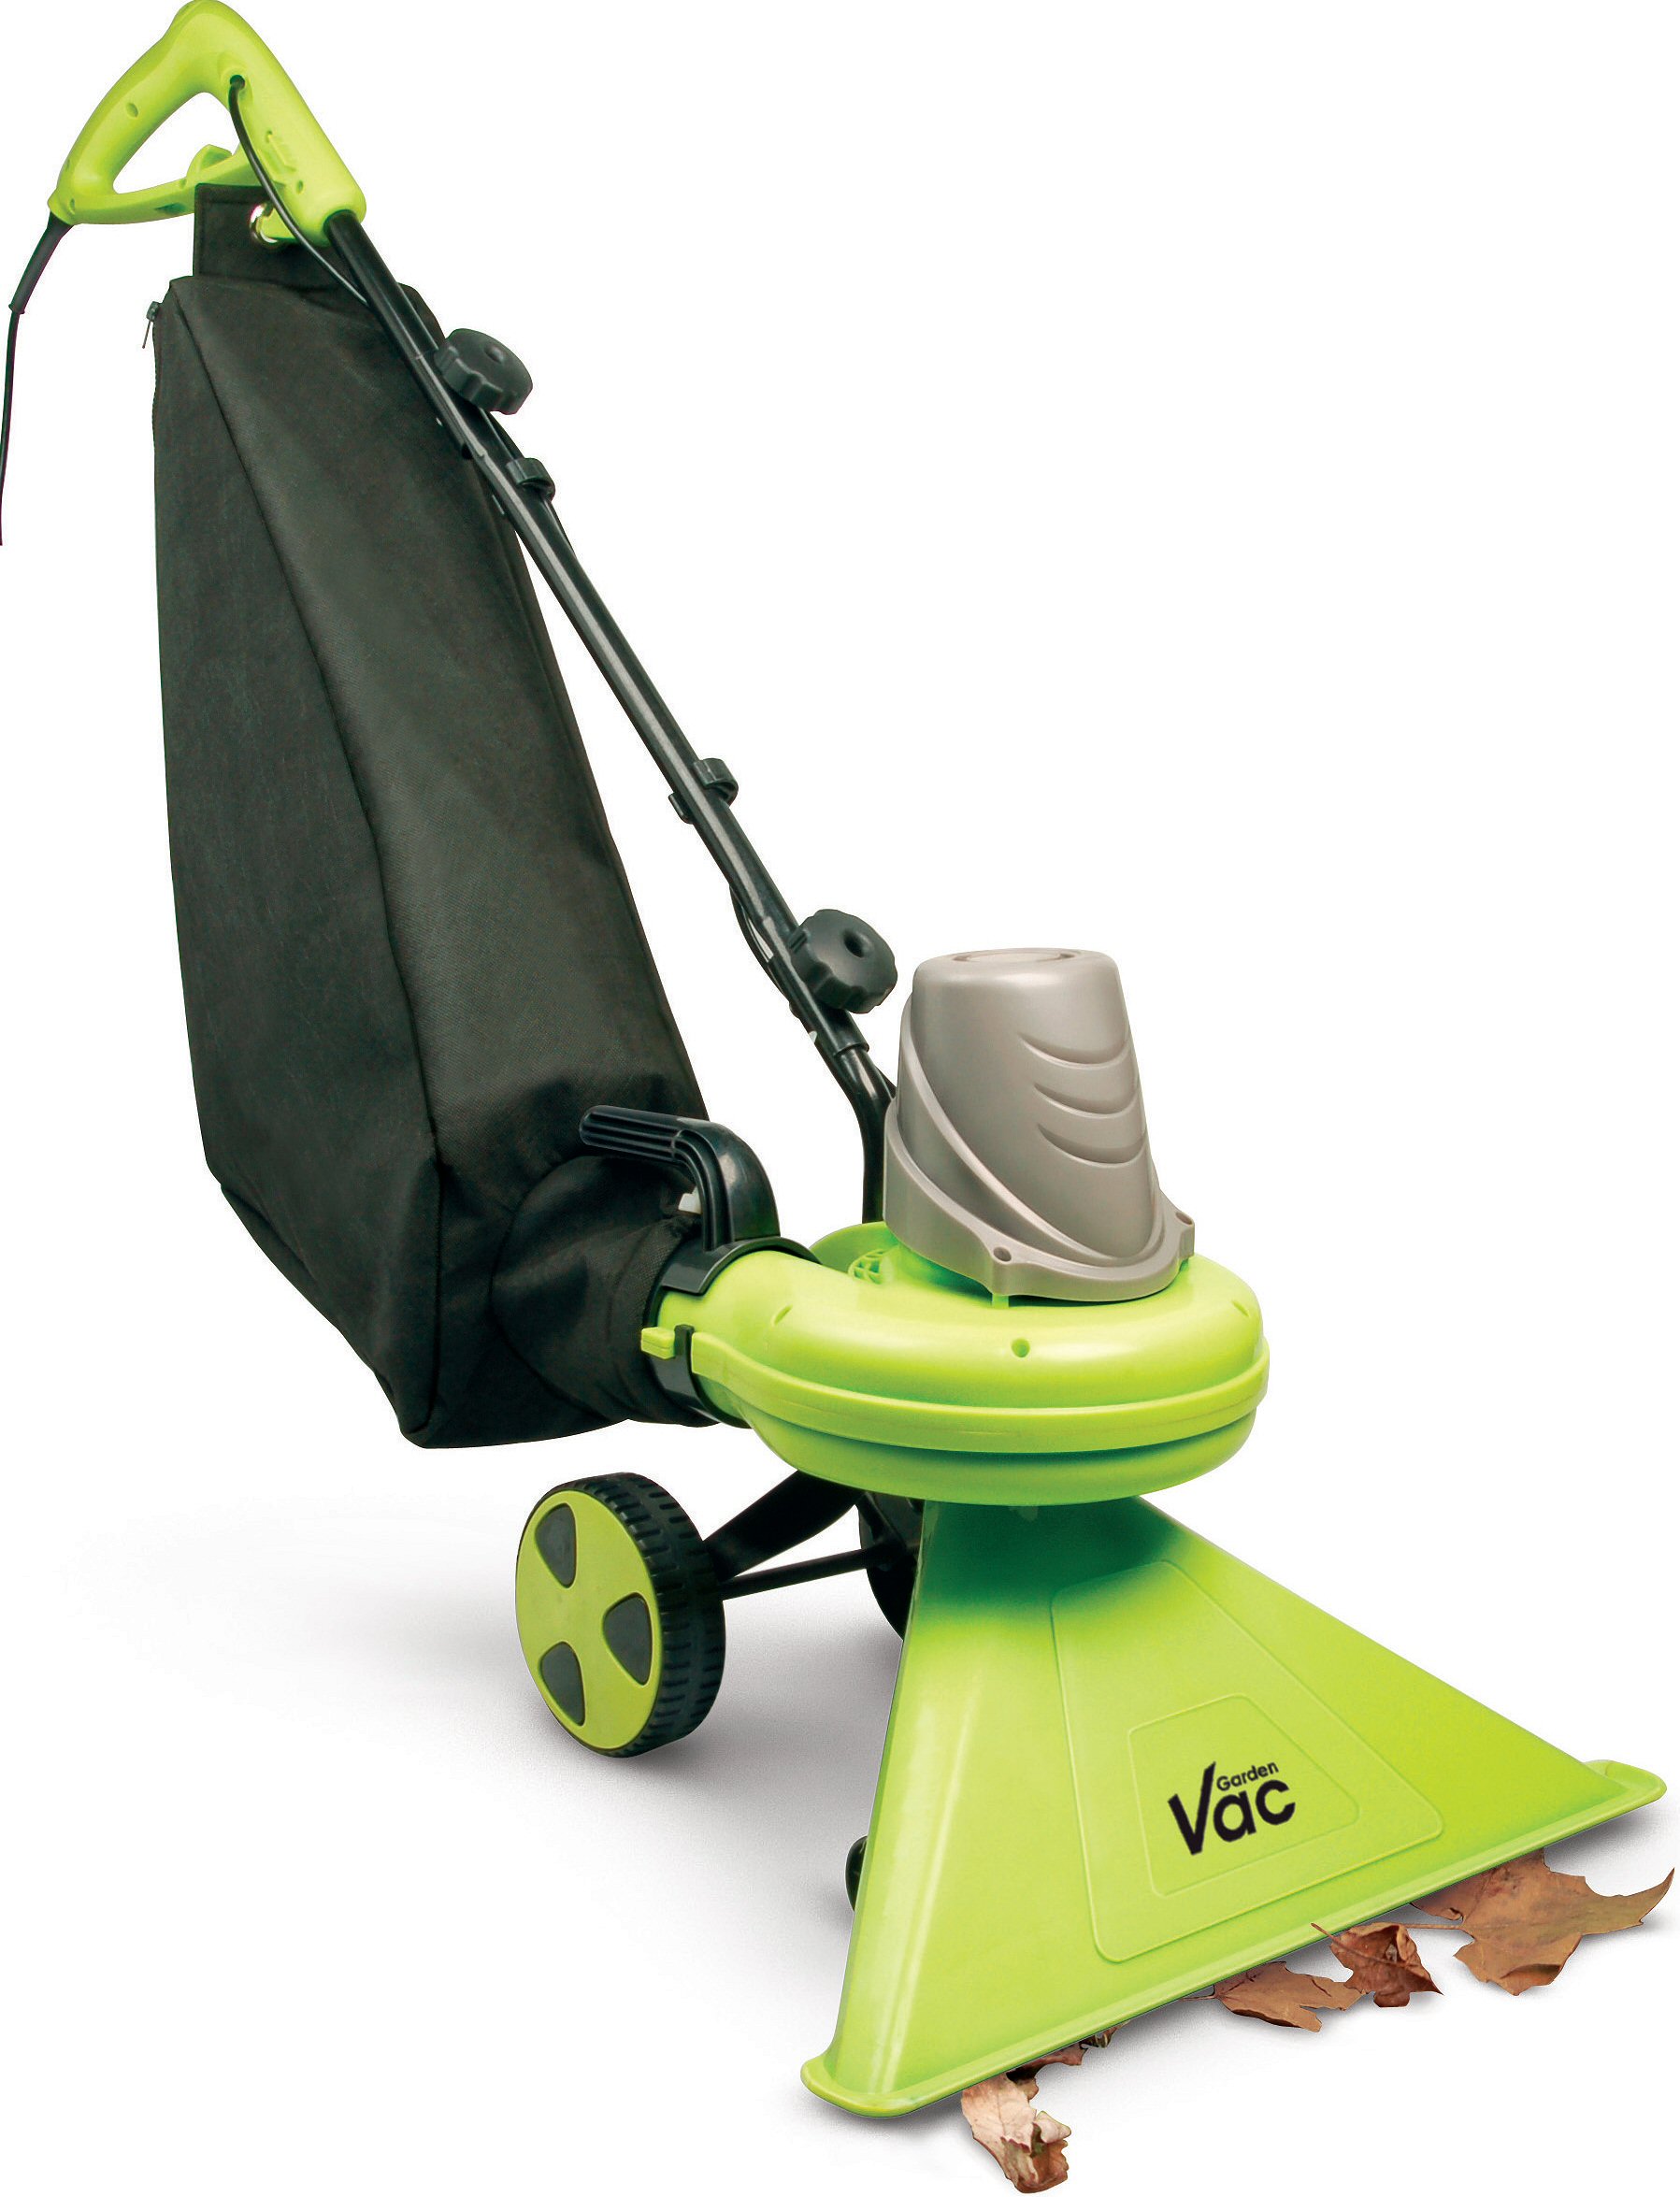 This powerful, easily manoeuvred Garden Vacuum will put an end to the dreary task of sweeping up lea